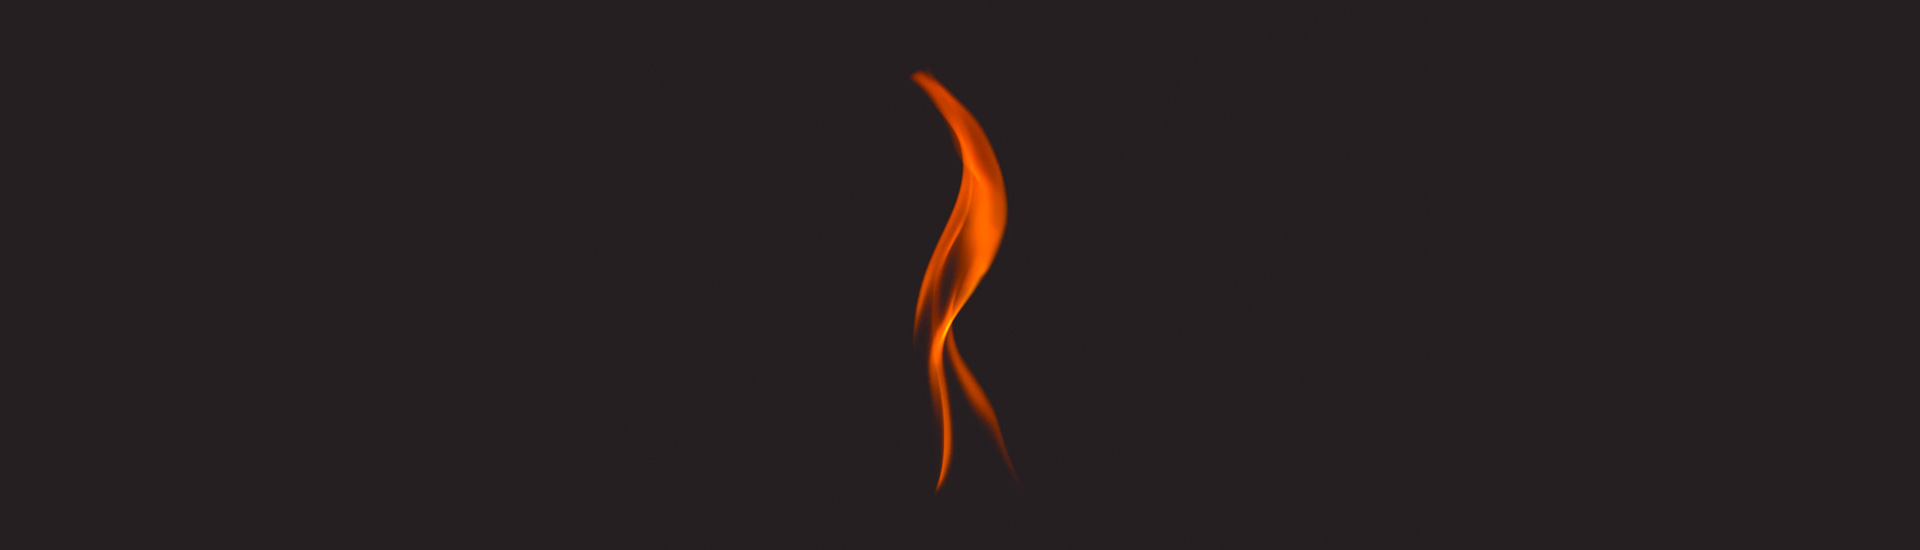 An icon of a flame in a diamond shape against a black background with a single flame